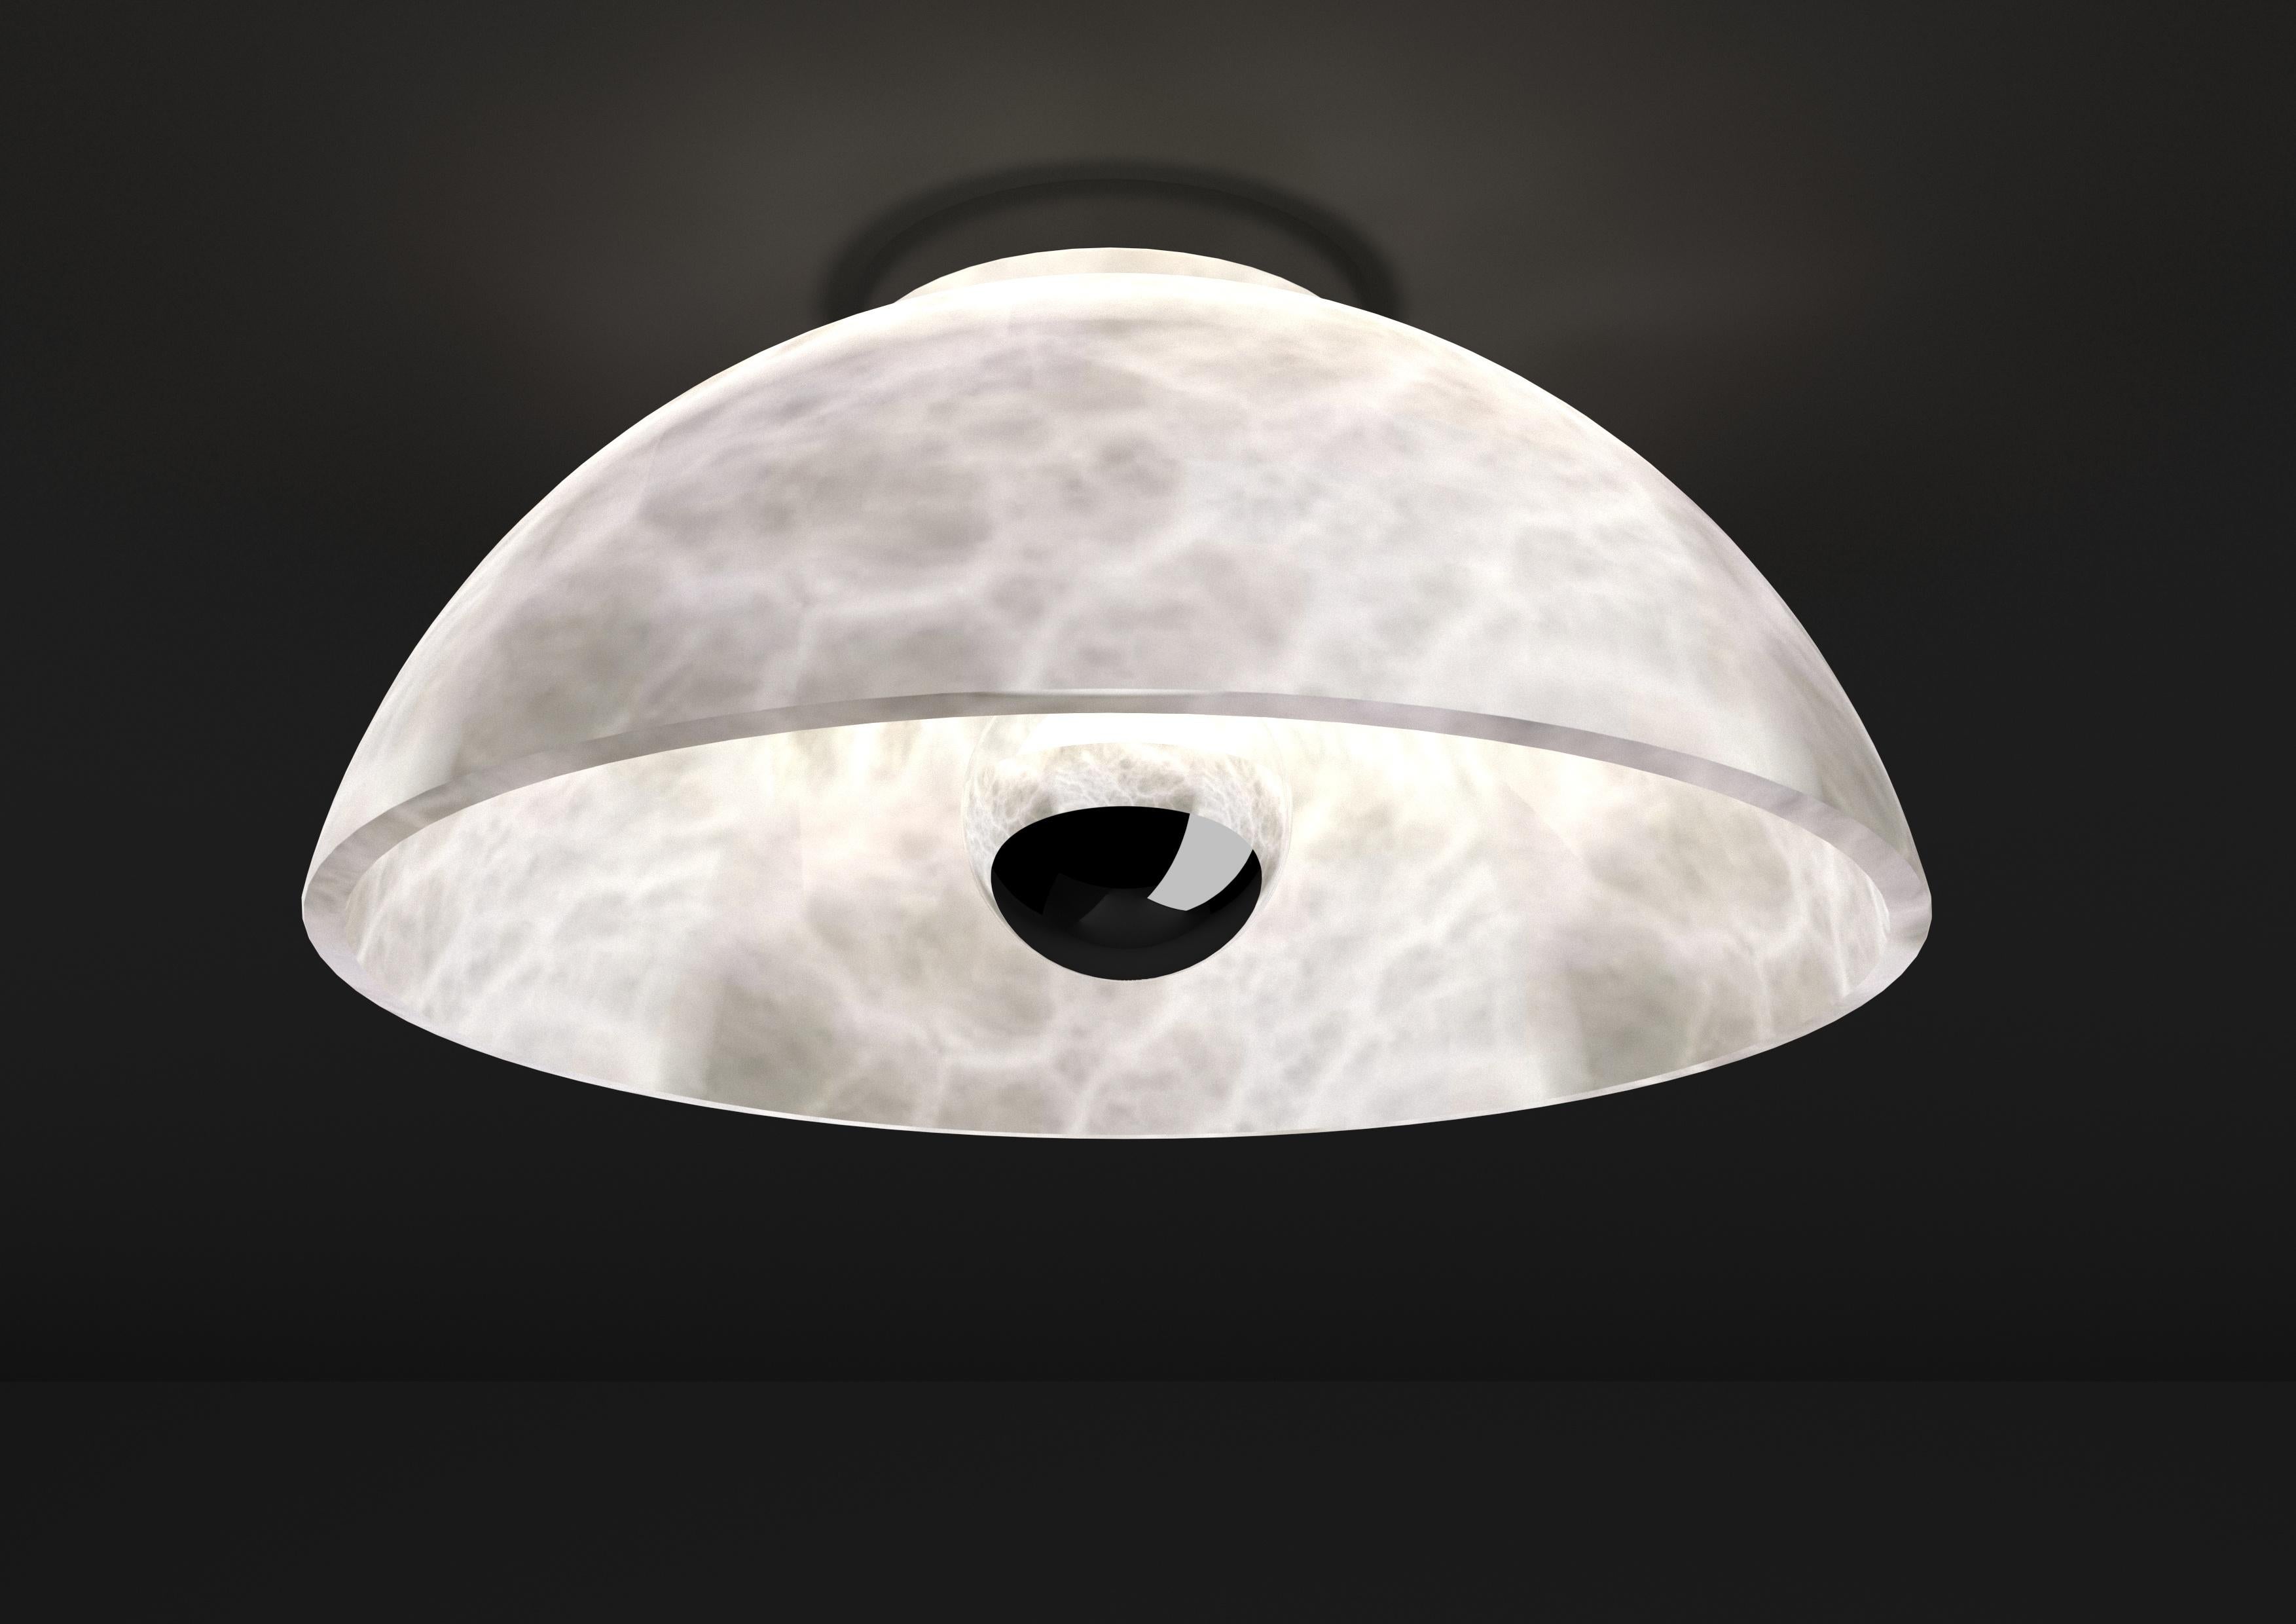 Apollo Shiny Silver Metal Ceiling Lamp by Alabastro Italiano
Dimensions: Ø 30 x W 17,5 cm.
Materials: White alabaster and metal.

Available in different finishes: Shiny Silver, Bronze, Brushed Brass, Ruggine of Florence, Brushed Burnished, Shiny